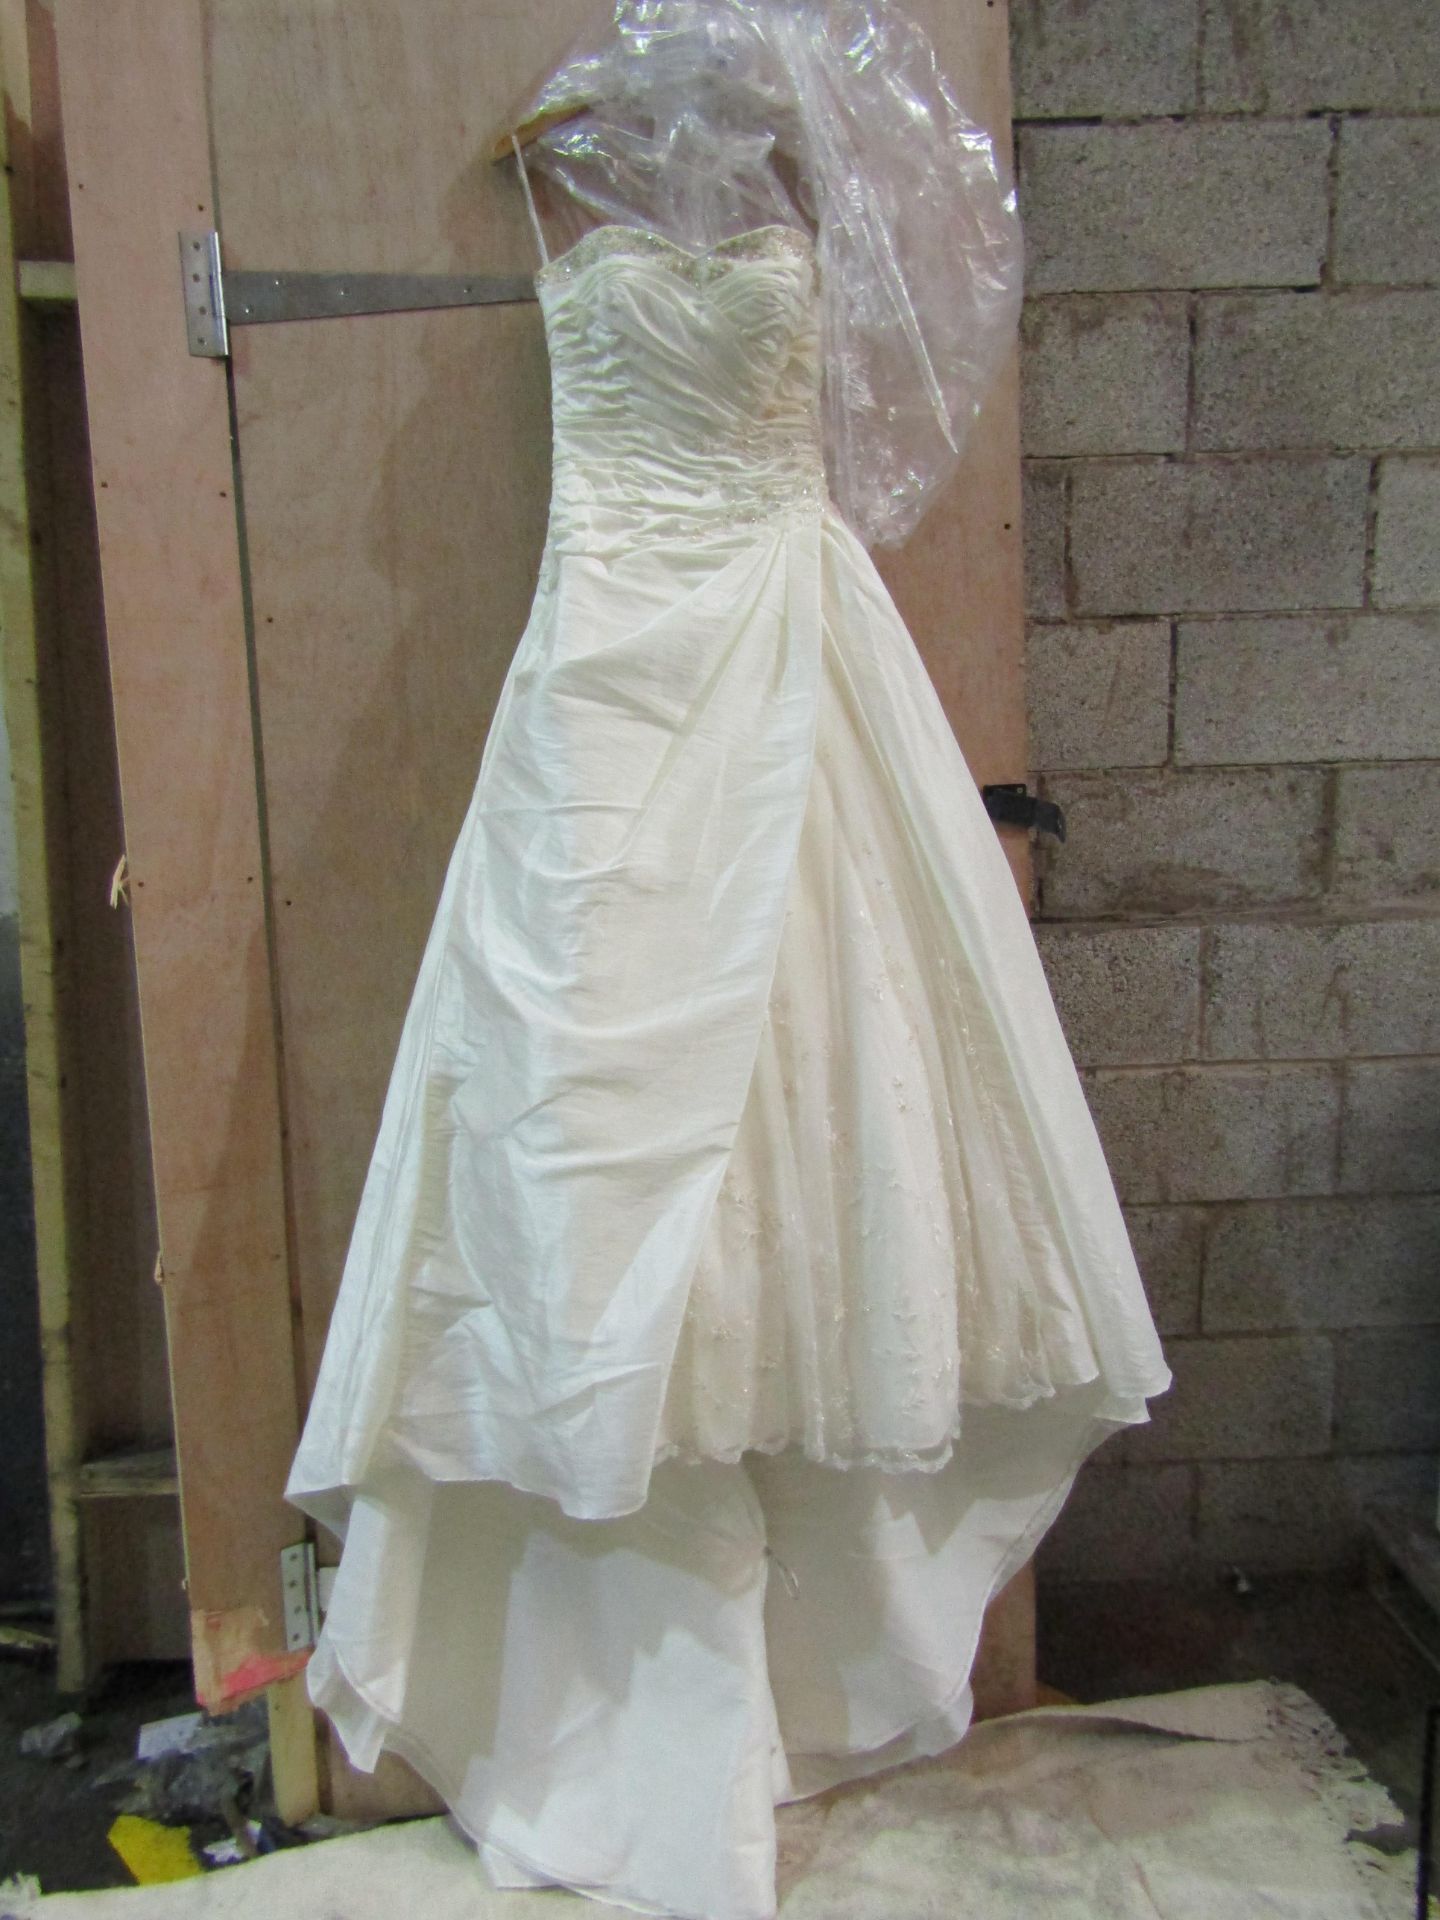 Approx 500 pieces of wedding shop stock to include wedding dresses, mother of the bride, dresses, - Image 27 of 43